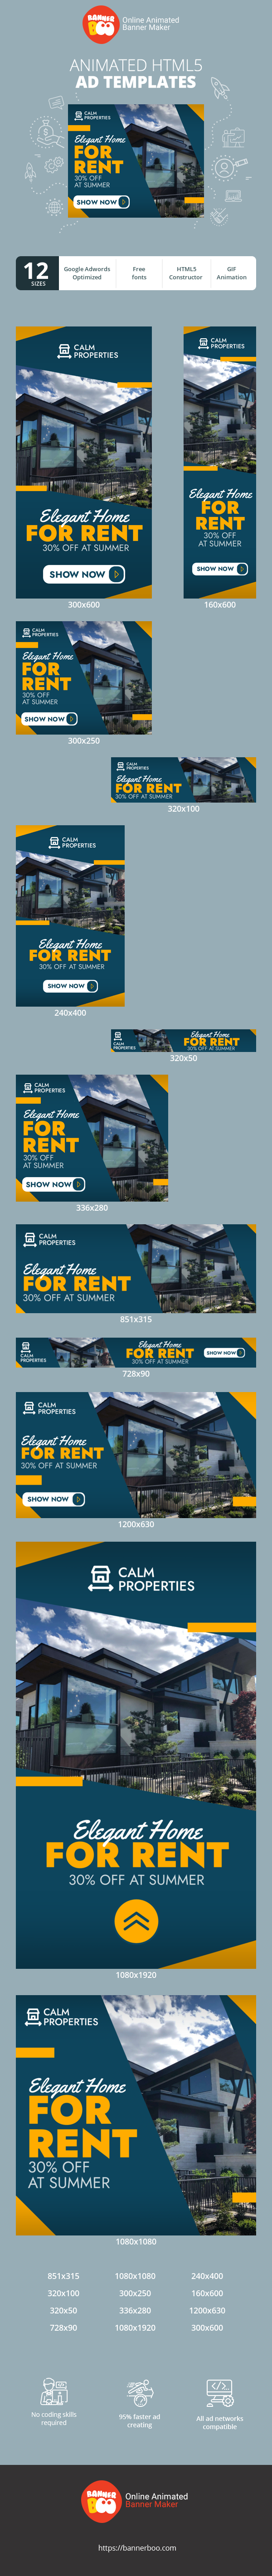 Banner ad template — Elegant Home For Rent —30% Off At Summer